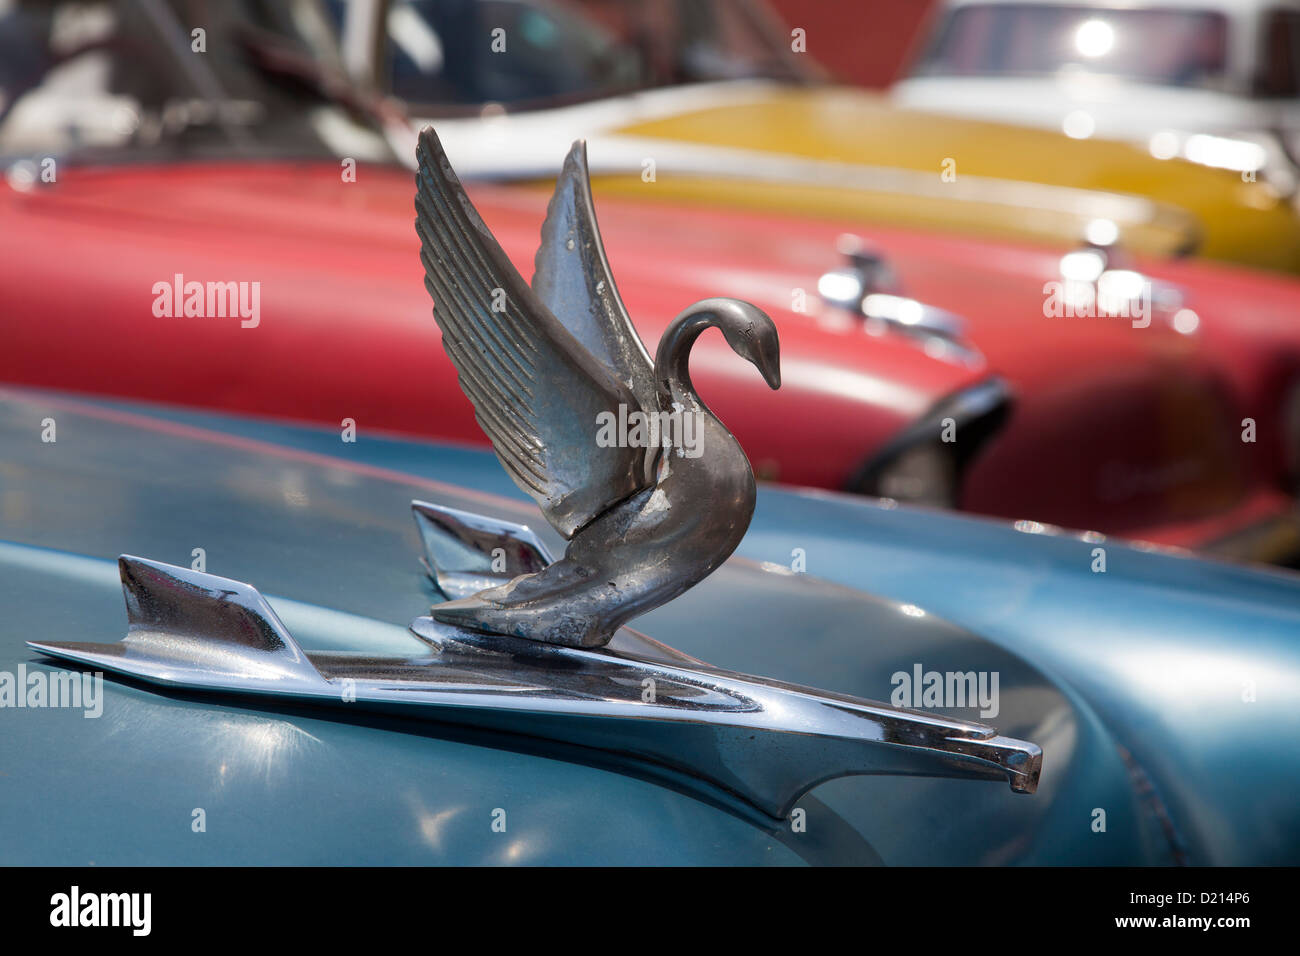 Hood ornament of a vintage American car, Oldtimer, Santiago de Cuba, Santiago de Cuba, Cuba, Caribbean Stock Photo